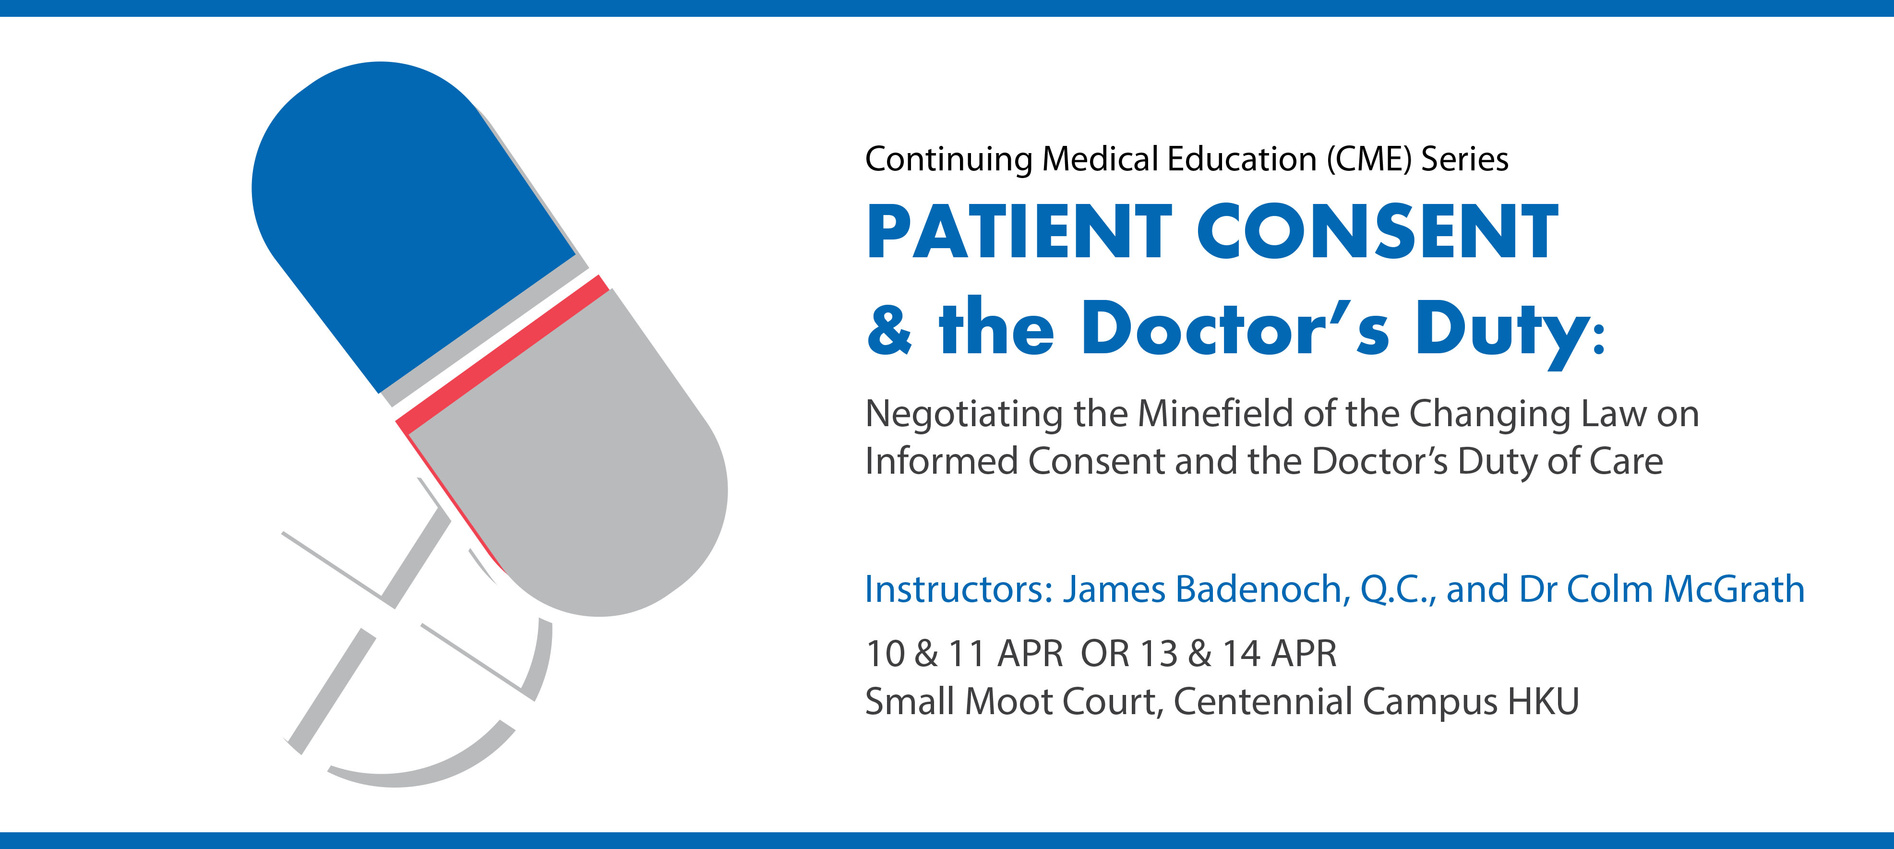 Patient Consent & the Doctor's Duty: Negotiating the Minefield of the Changing Law on Informed Consent and the Doctor's Duty of Care